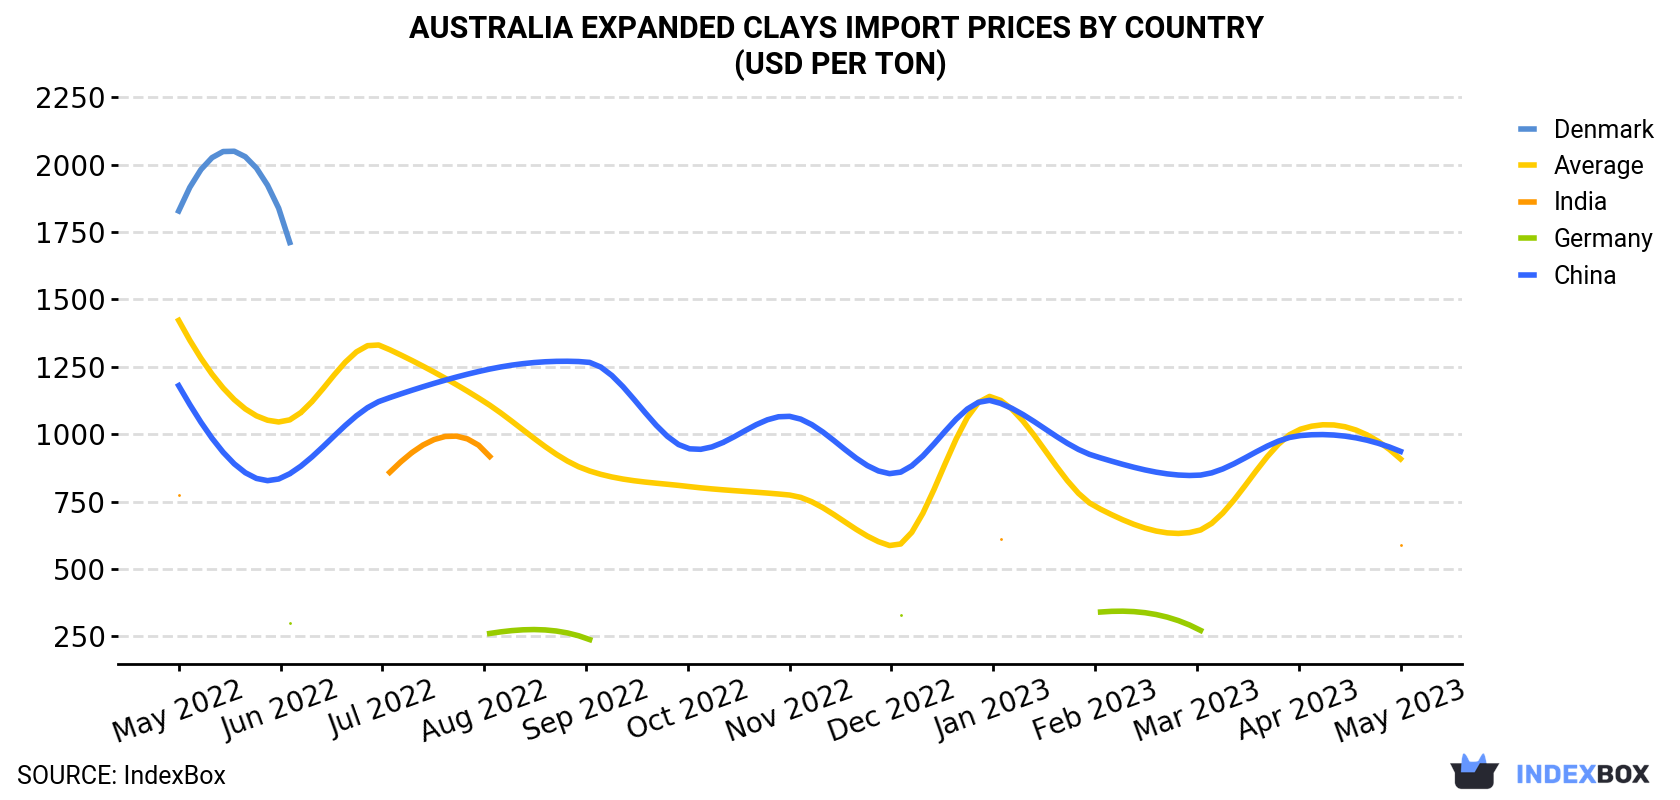 Australia Expanded Clays Import Prices By Country (USD Per Ton)